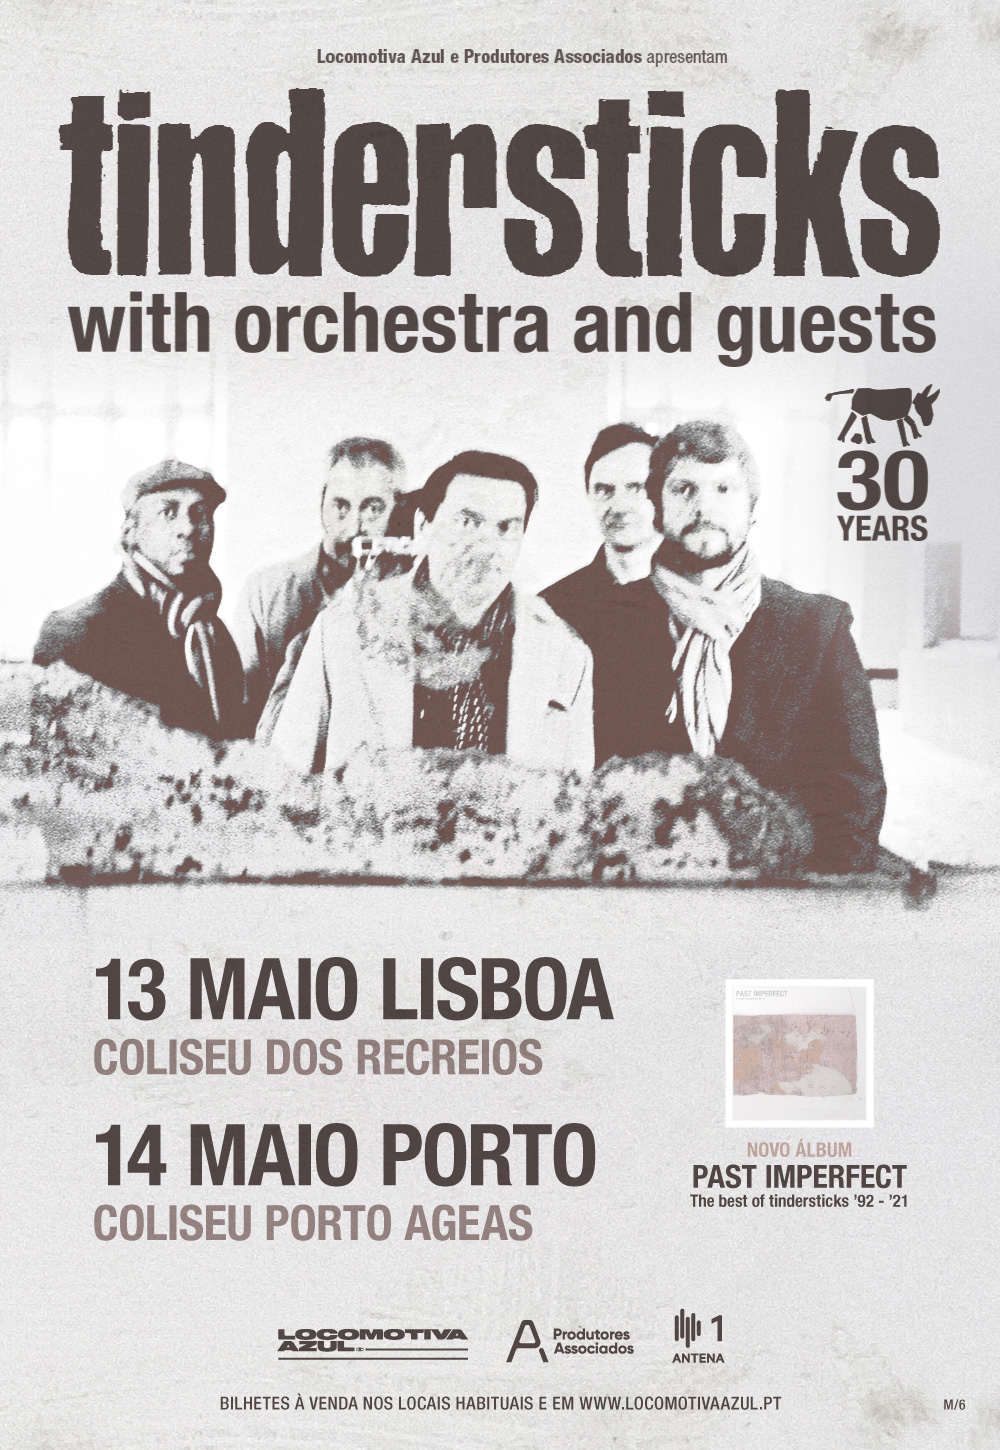 Tindersticks with orchestra and guests